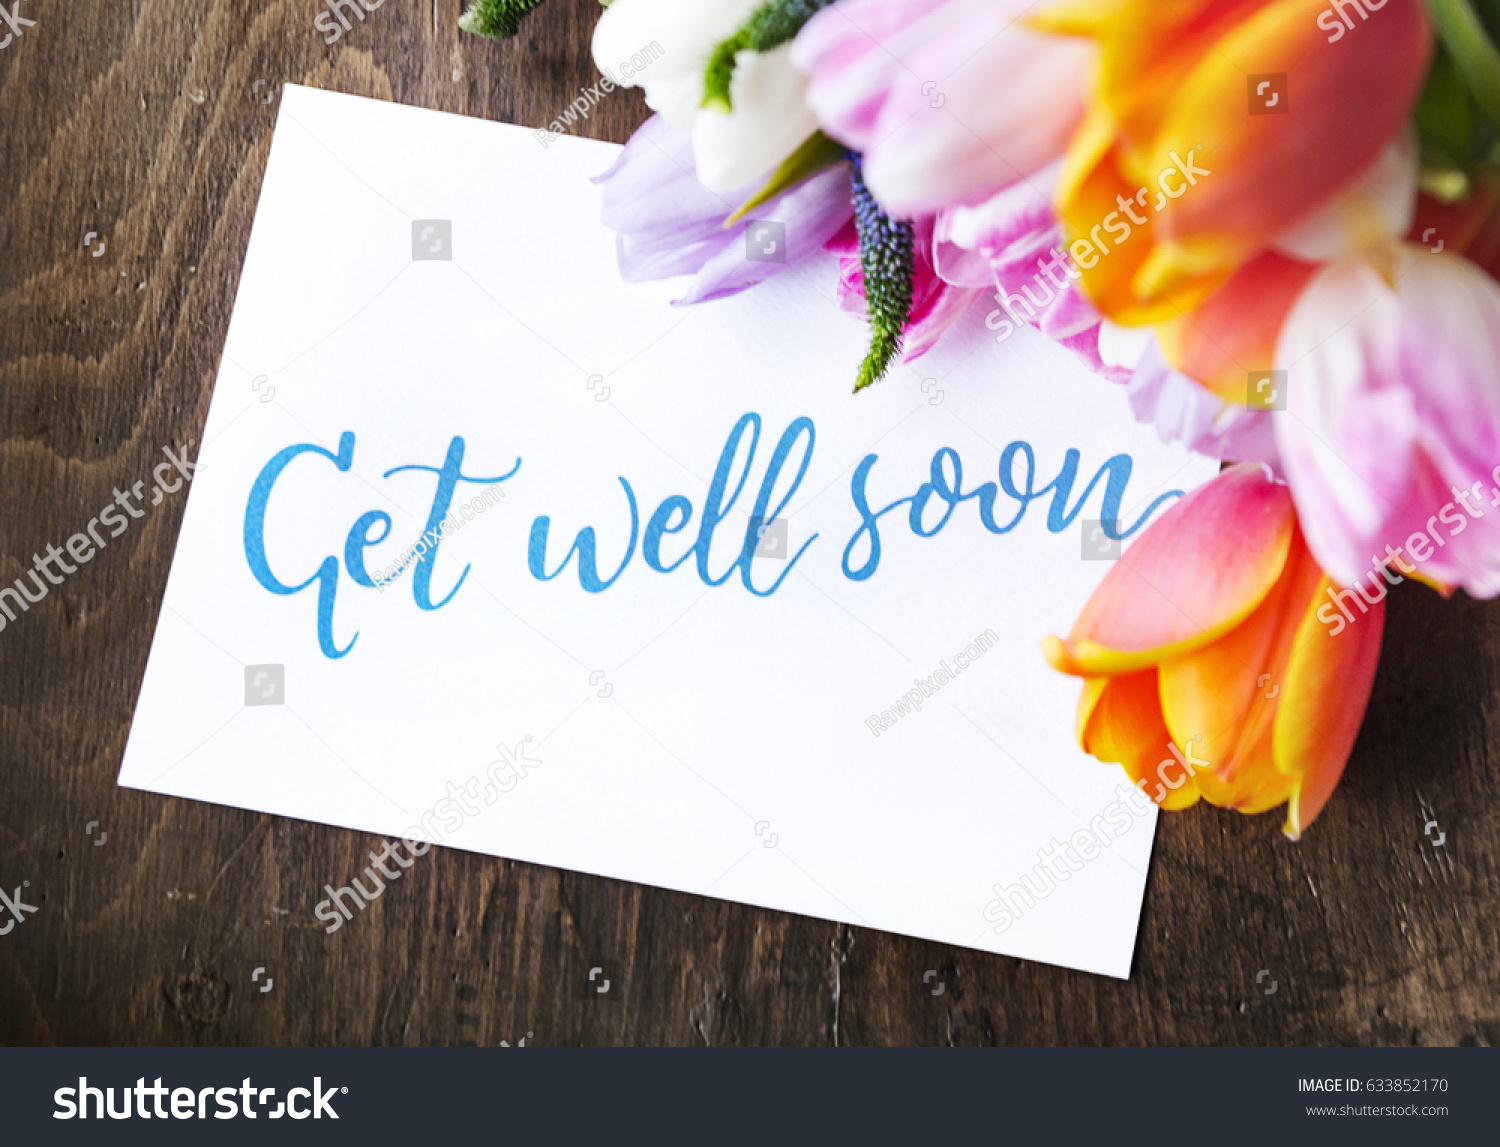 Tulips Flowers Bouquet with Get Well Soon Wishing Card #633852170